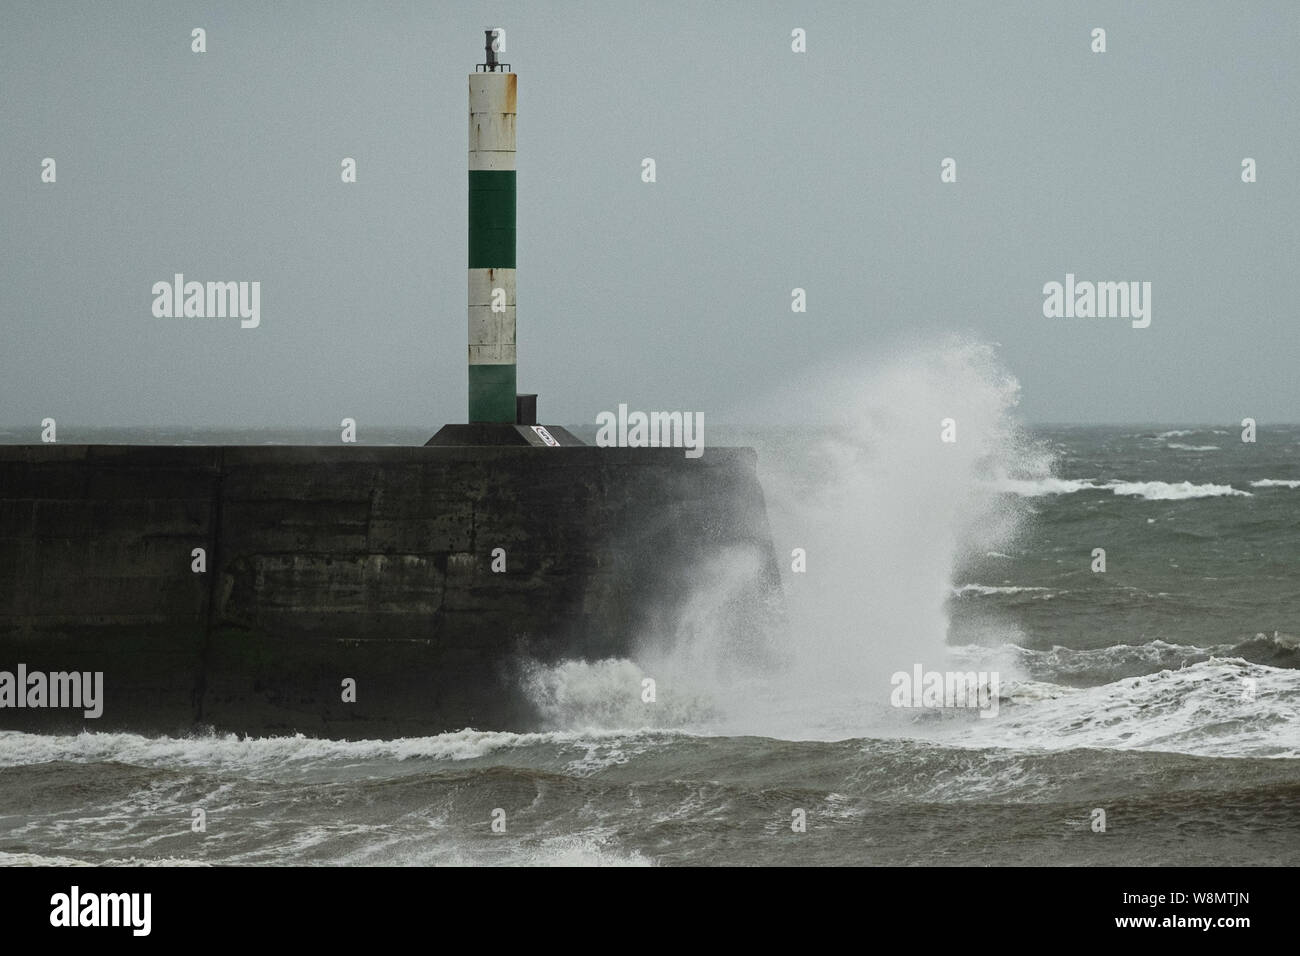 Aberystwyth, UK. 10th Aug, 2019. UK Weather: Gales force winds and stormy seas batter the harbour and lighthouse in Aberystwyth as unseasonably wet and windy weather sweeps across much of the west of the UK , bringing severe disruption to travel and forcing the cancellation of many outdoor events. Credit: keith morris/Alamy Live News Stock Photo